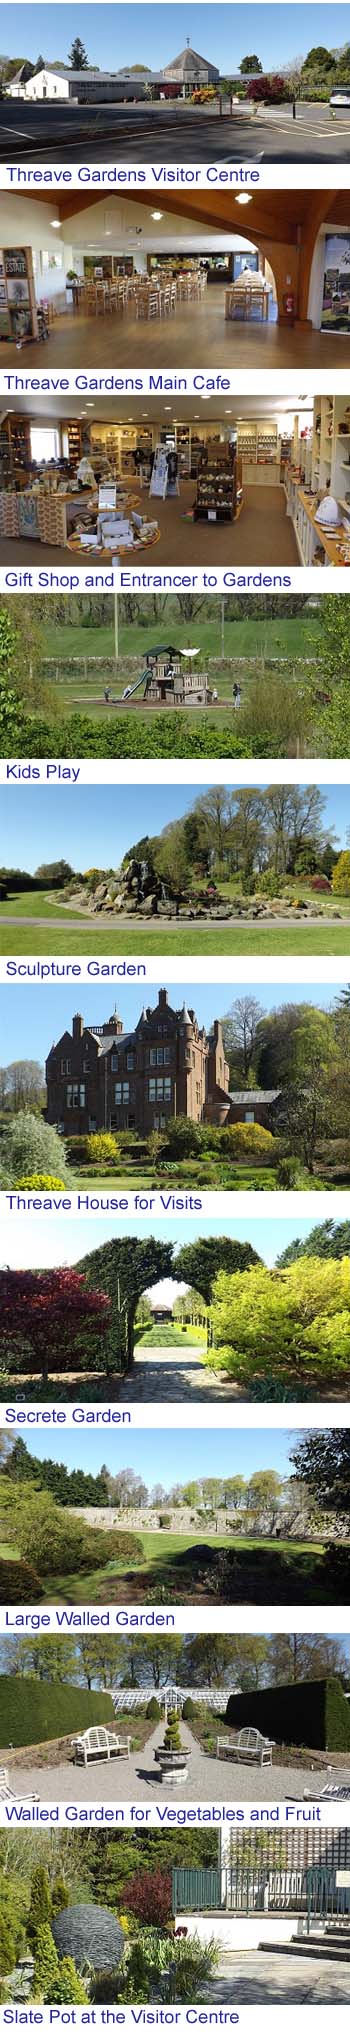 Threave Gardens and Mansion House Images